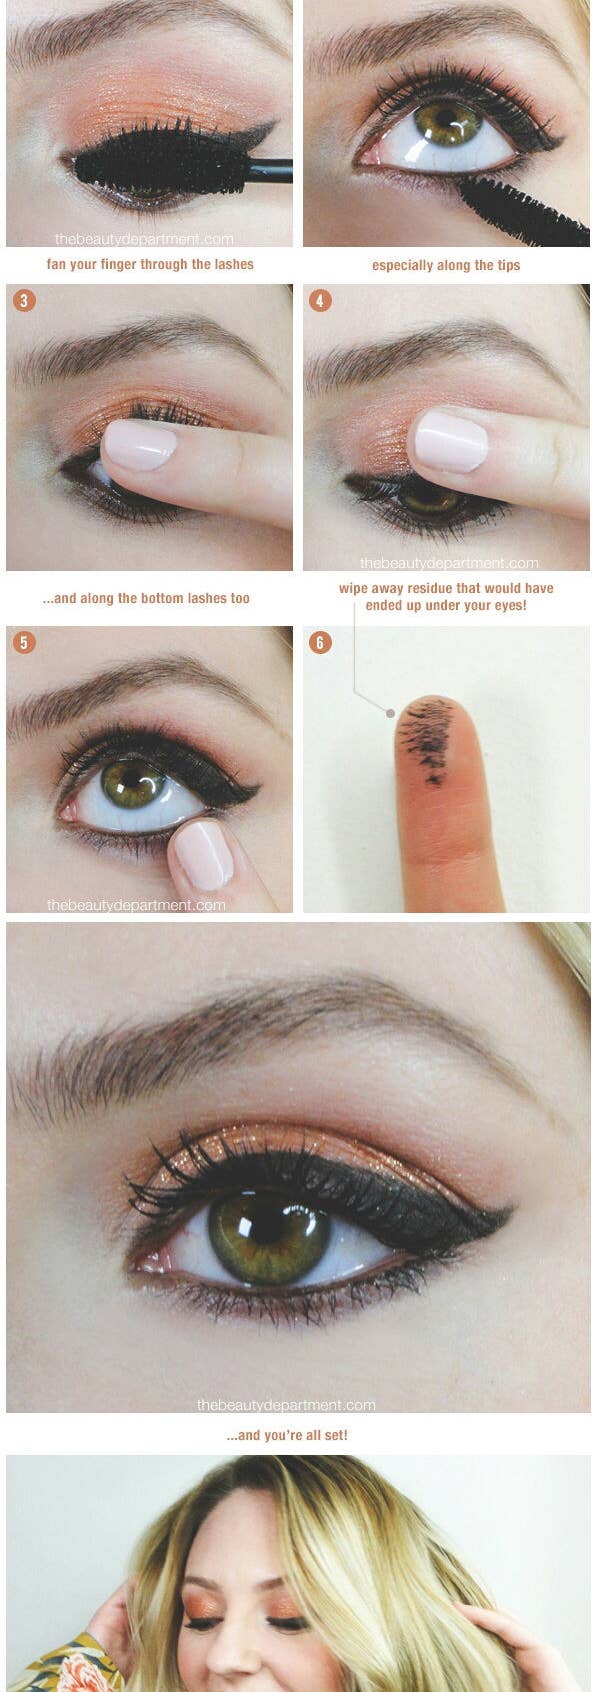 27 Tips And Tricks For Getting Your Makeup To Look The Best It Ever Has